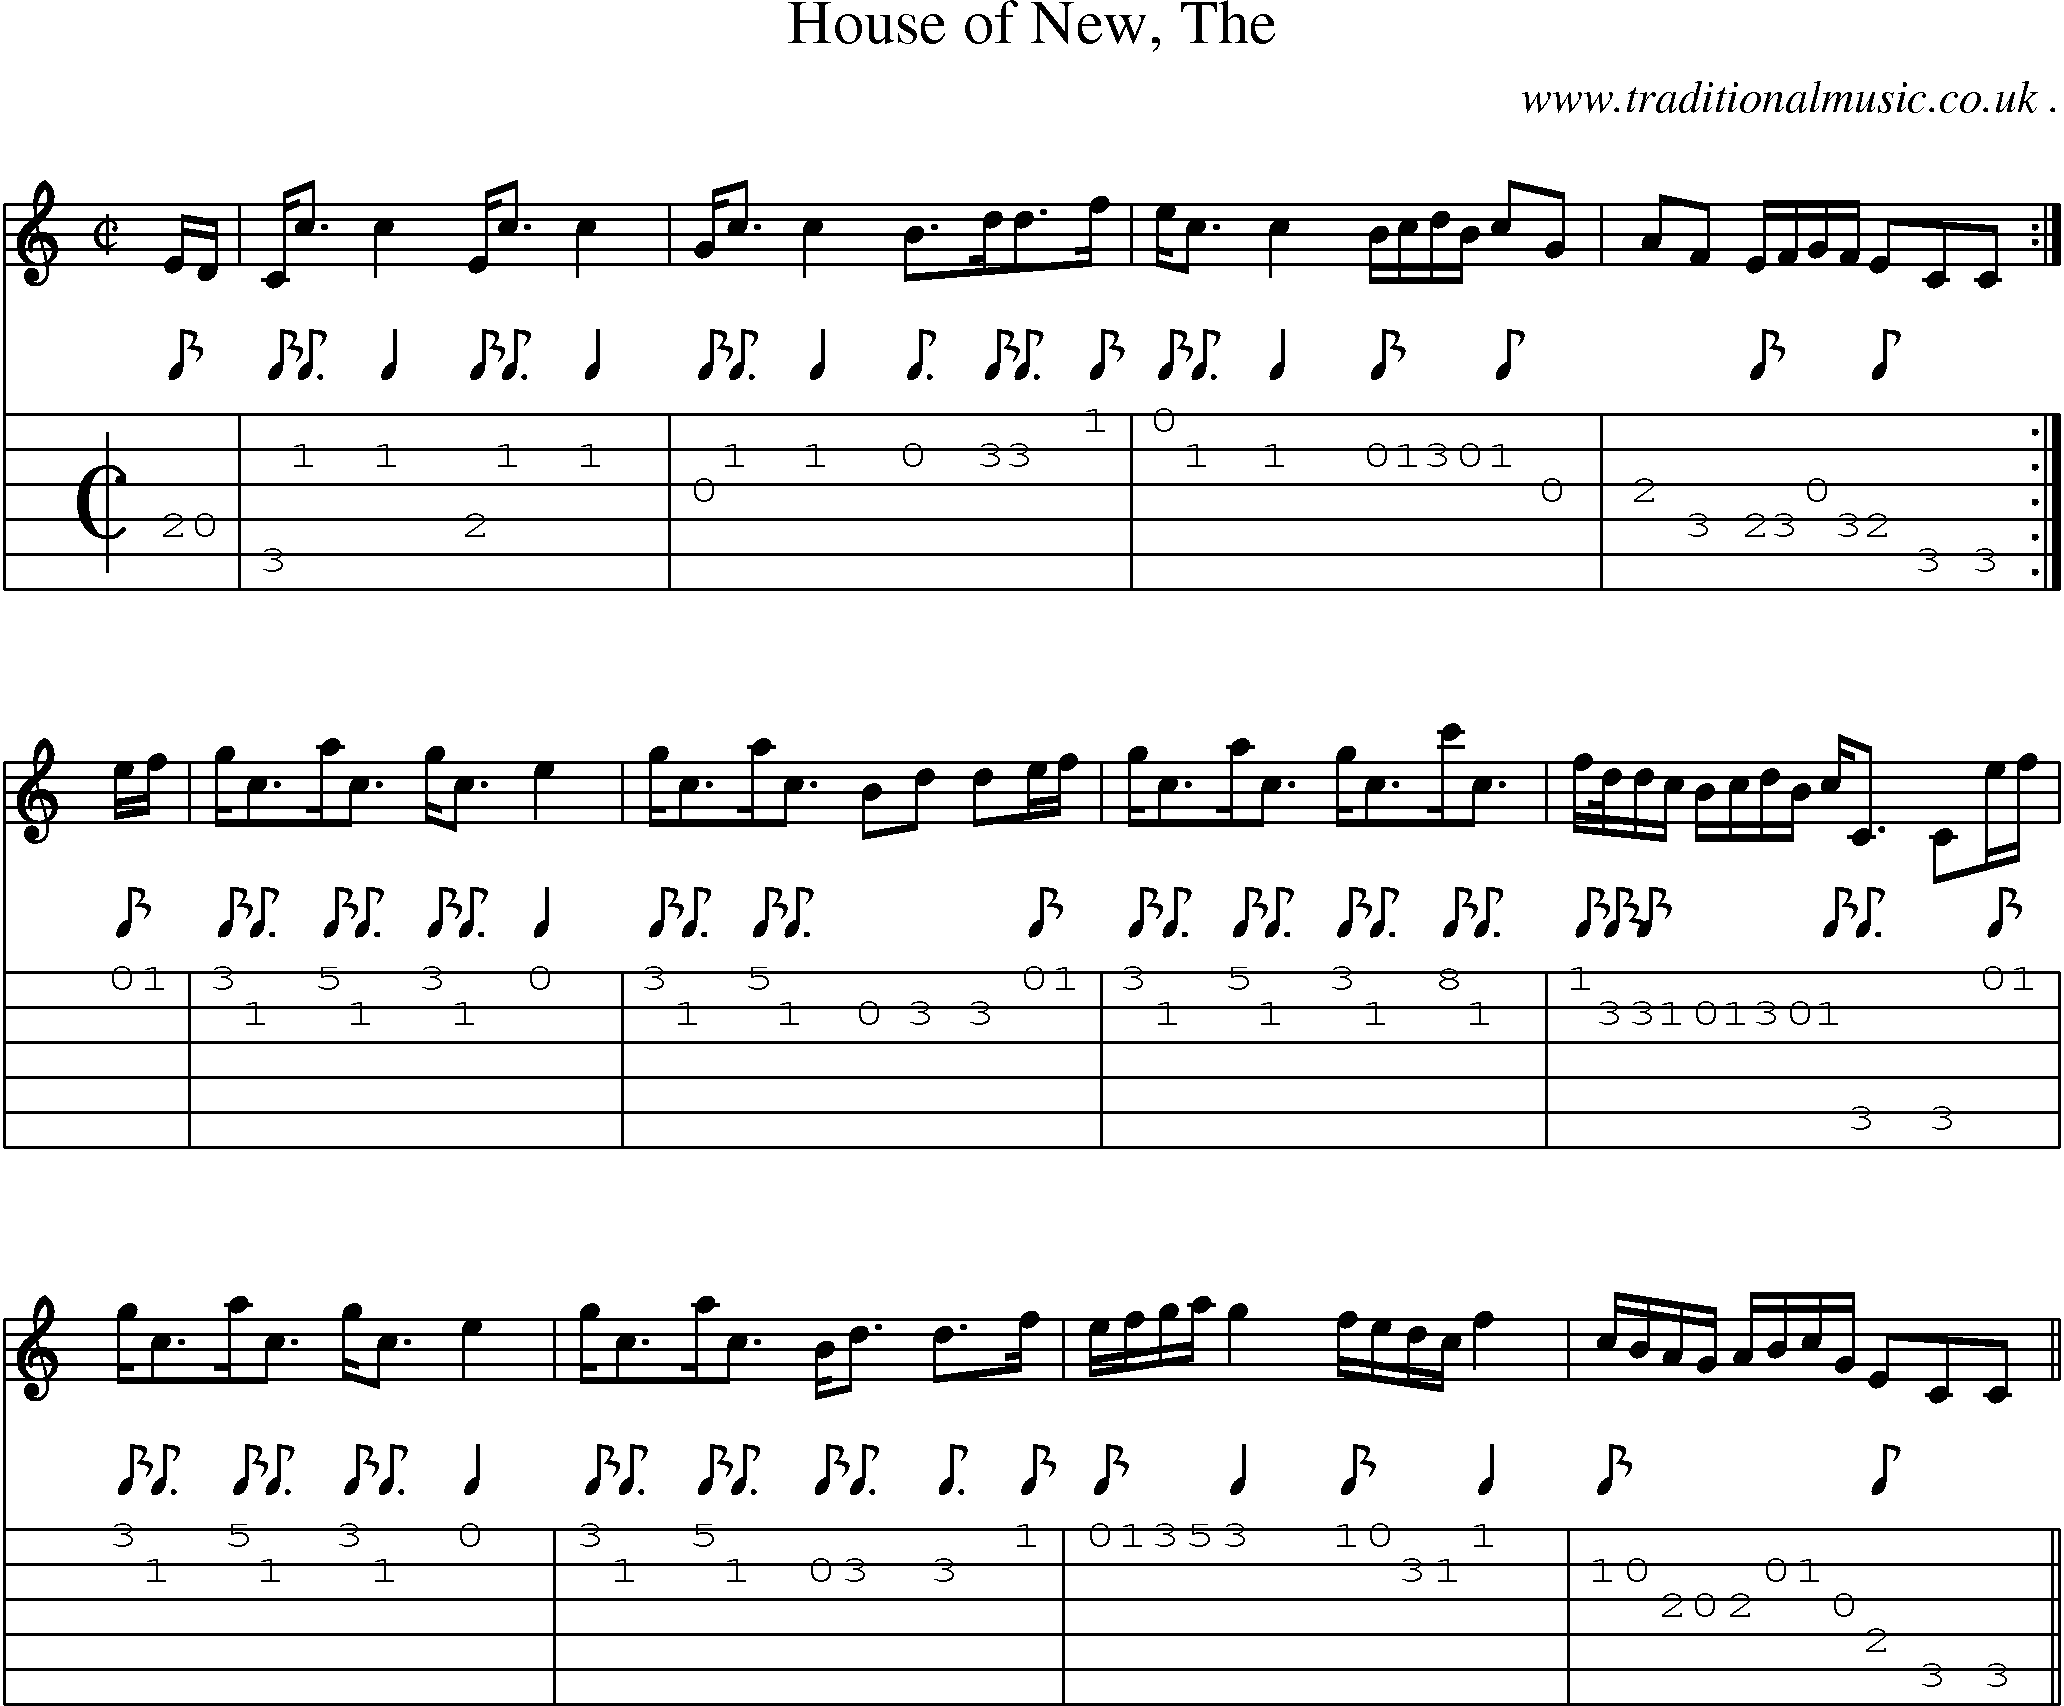 Sheet-music  score, Chords and Guitar Tabs for House Of New The